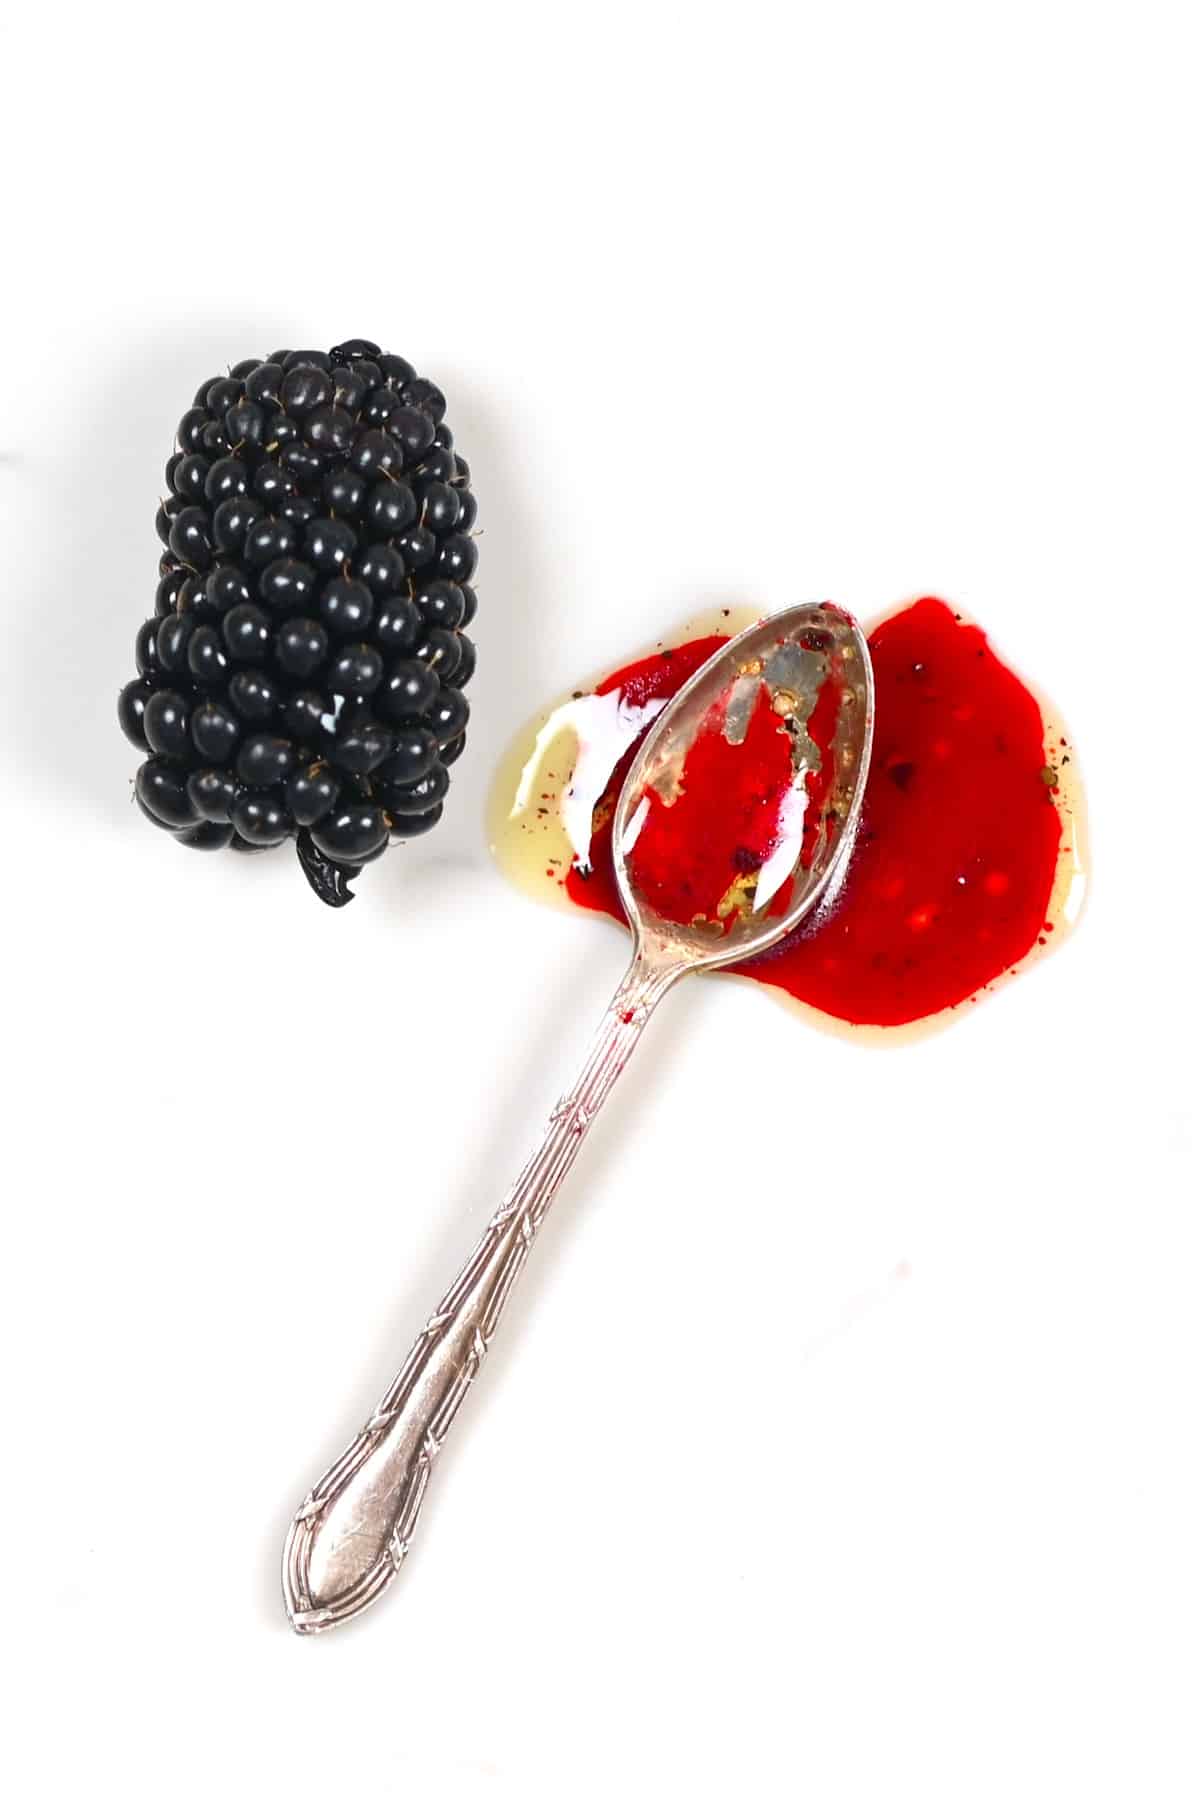 A spoonful of blackberry salad dressing and a blackberry